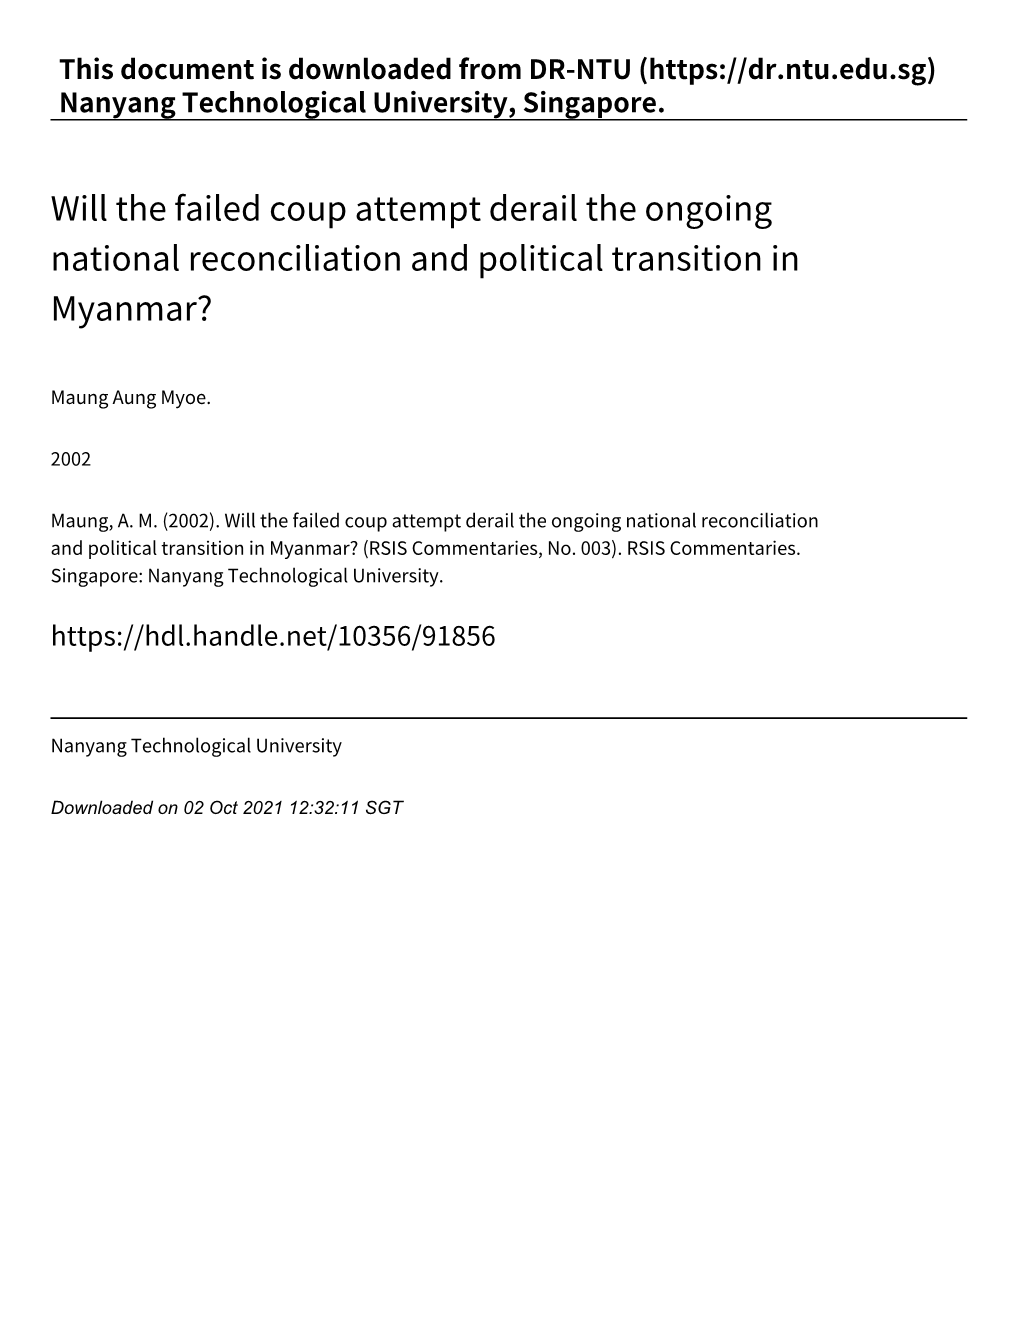 Will the Failed Coup Attempt Derail the Ongoing National Reconciliation and Political Transition in Myanmar?